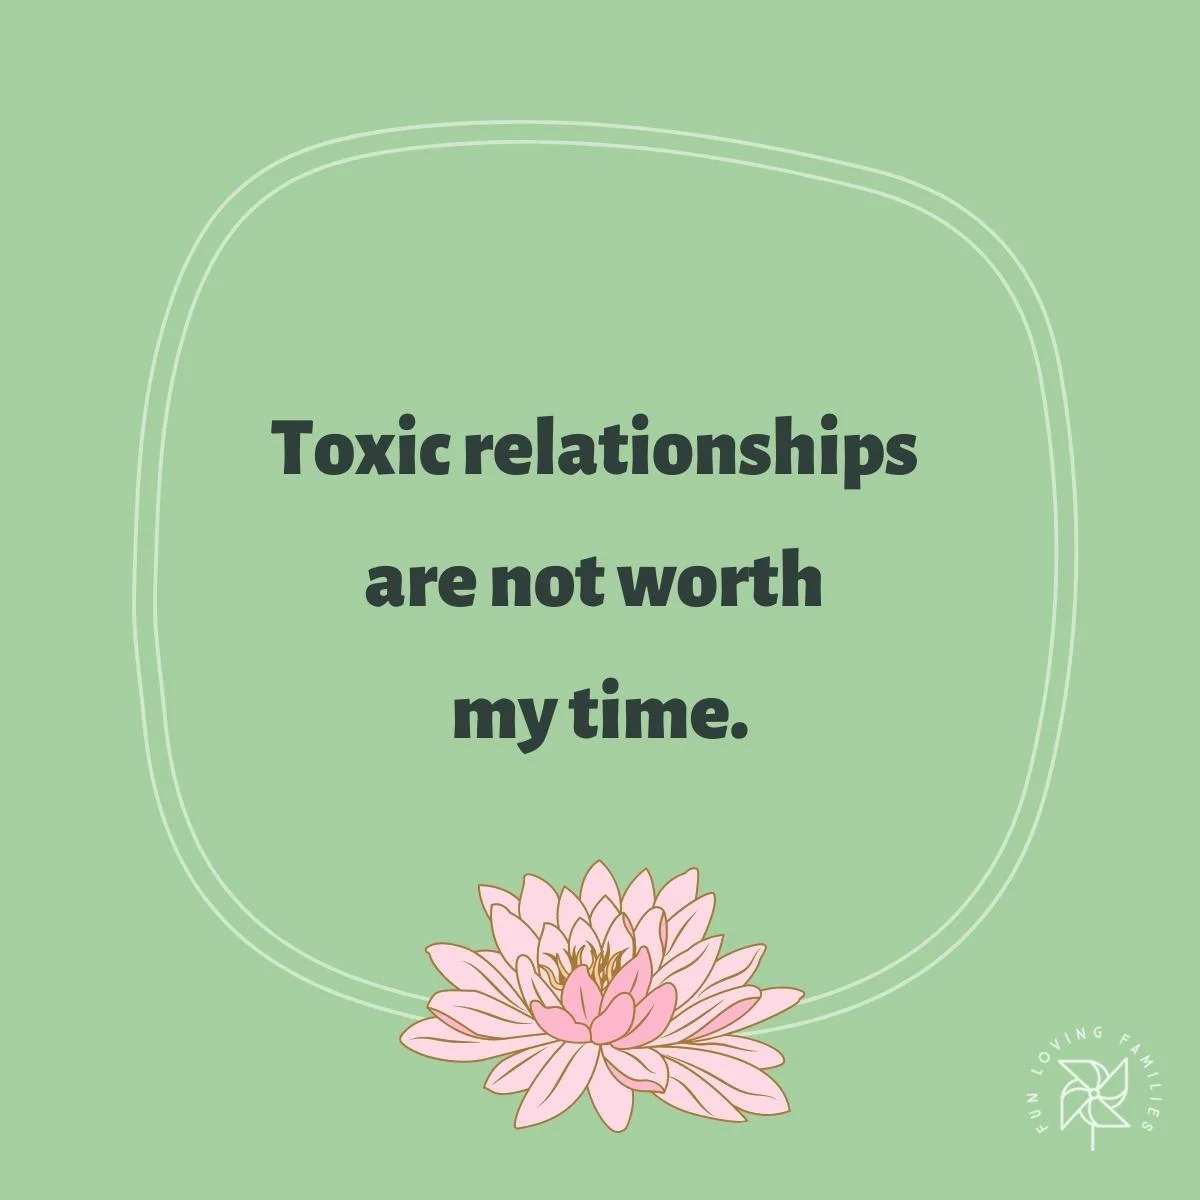 Toxic relationships are not worth my time affirmation